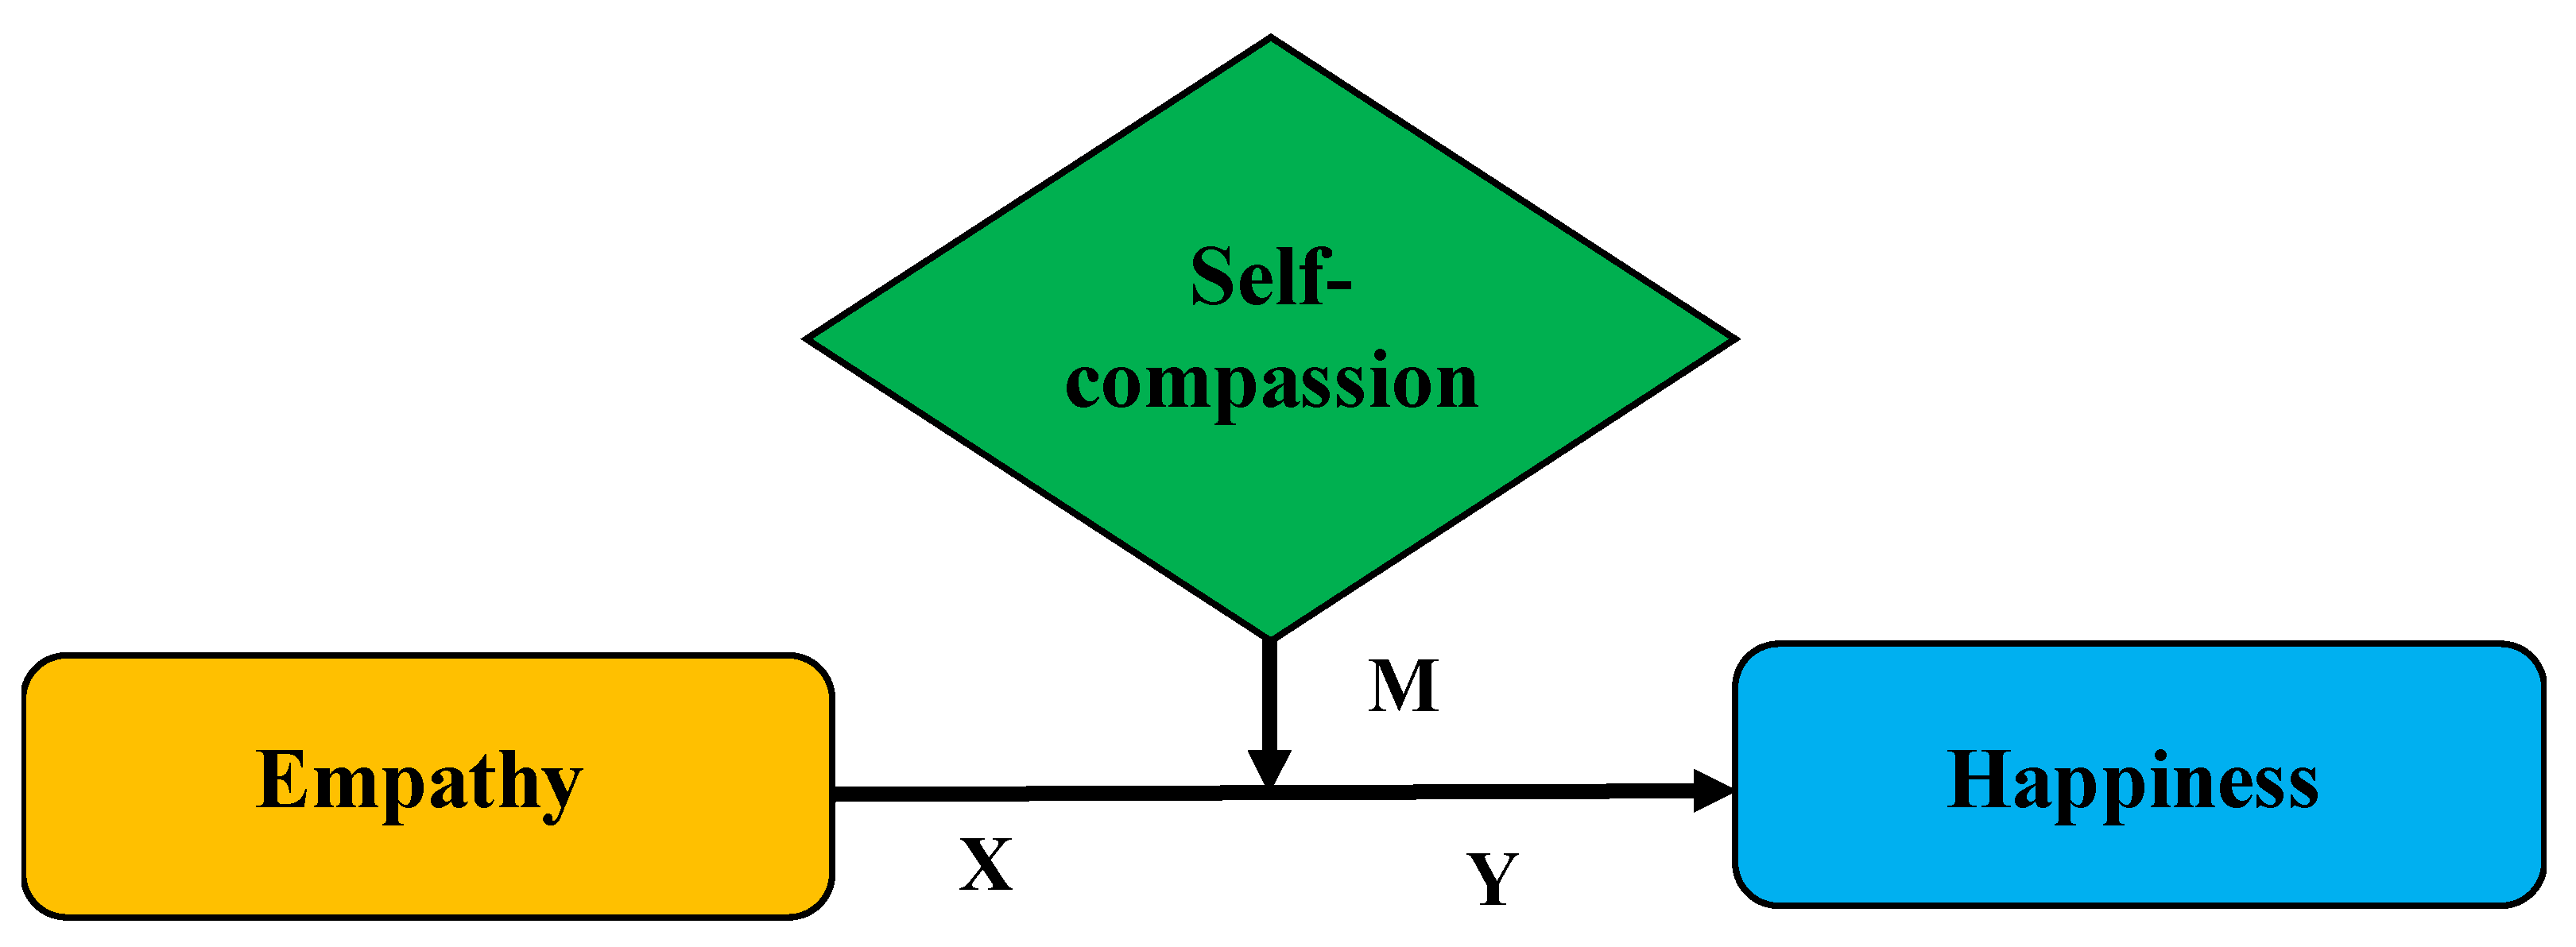 Social Sciences | Free Full-Text | Self-Compassion and Empathy as  Predictors of Happiness among Late Adolescents